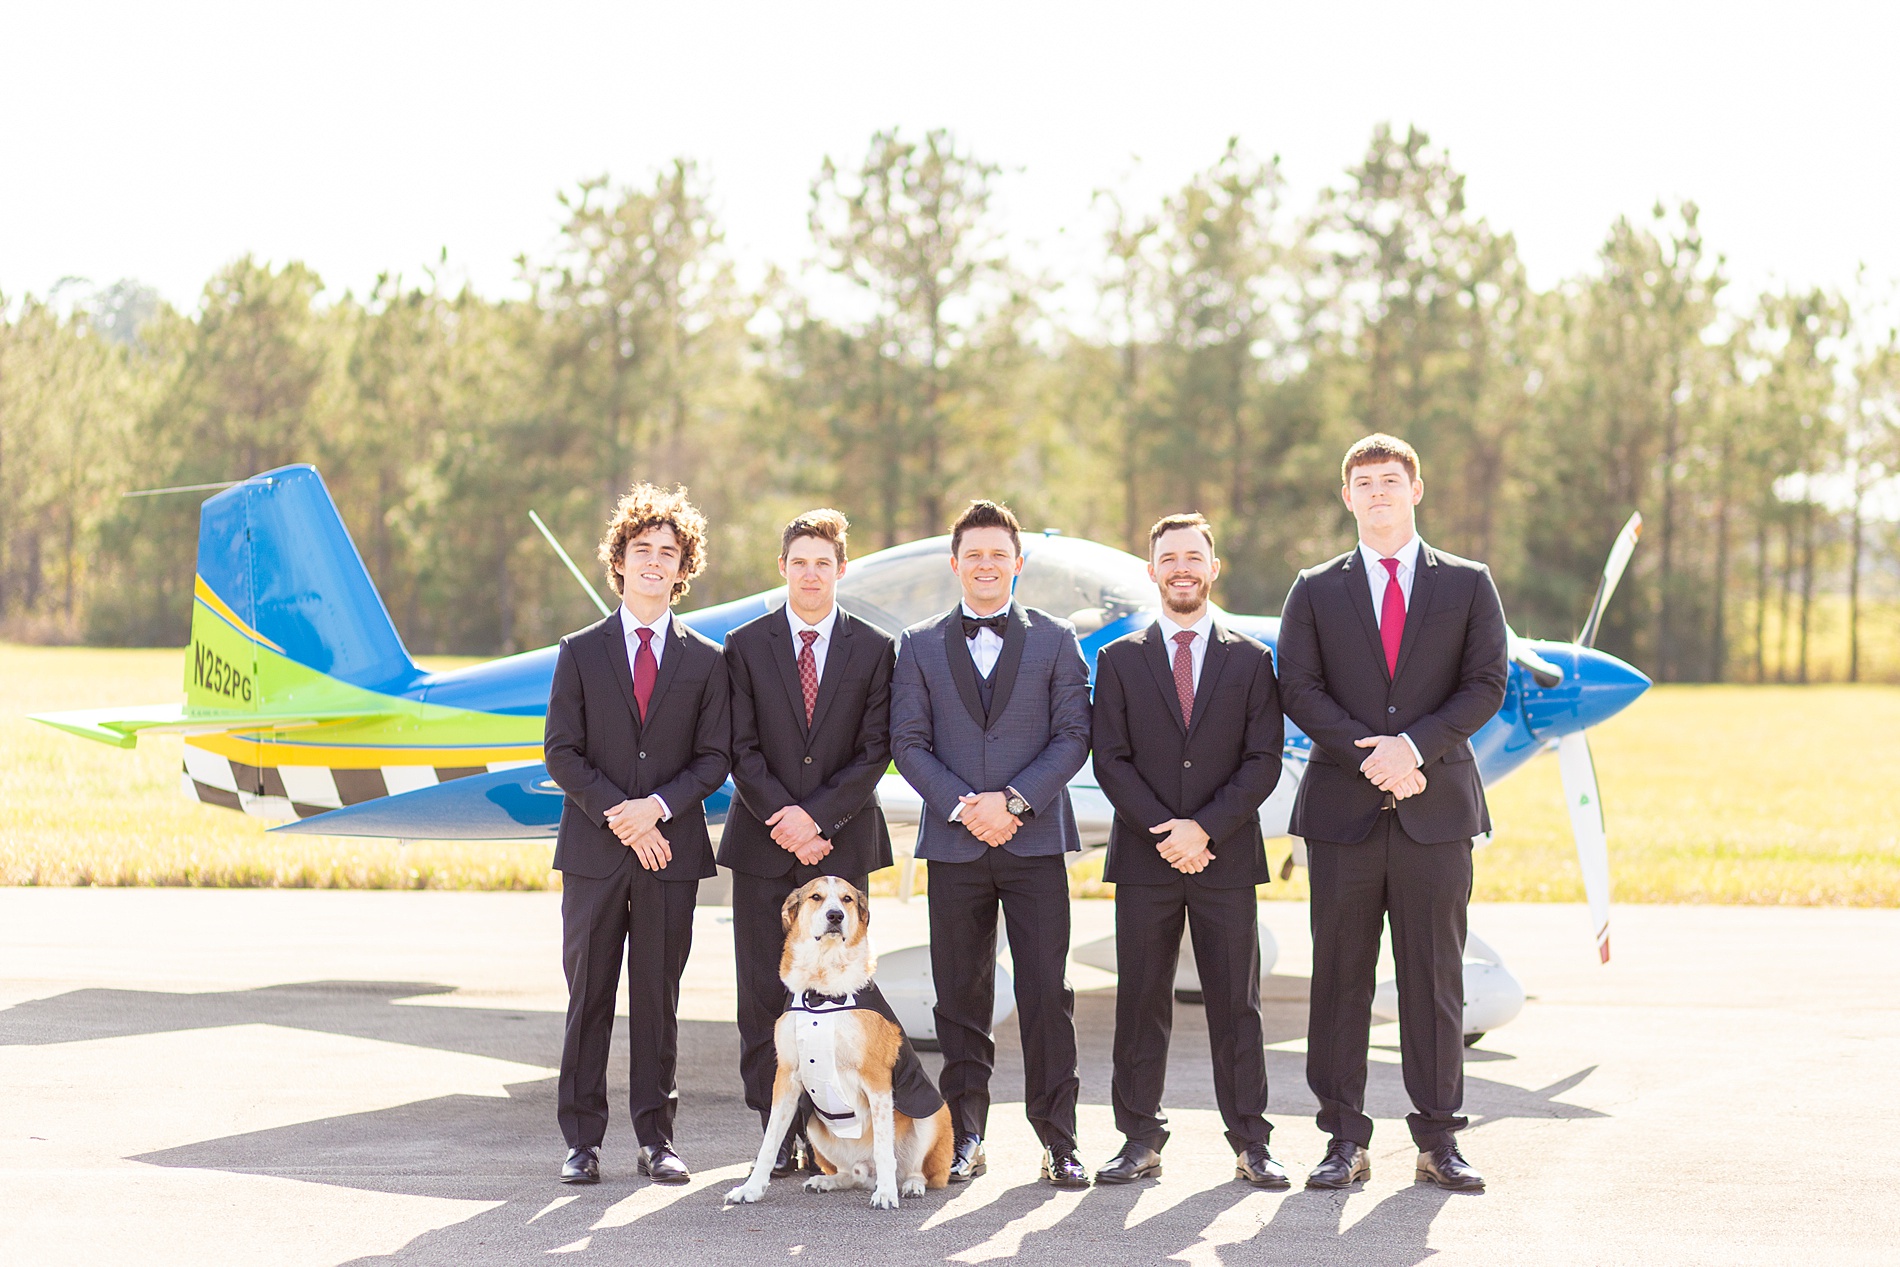 groom and groomsmen in front of airplane